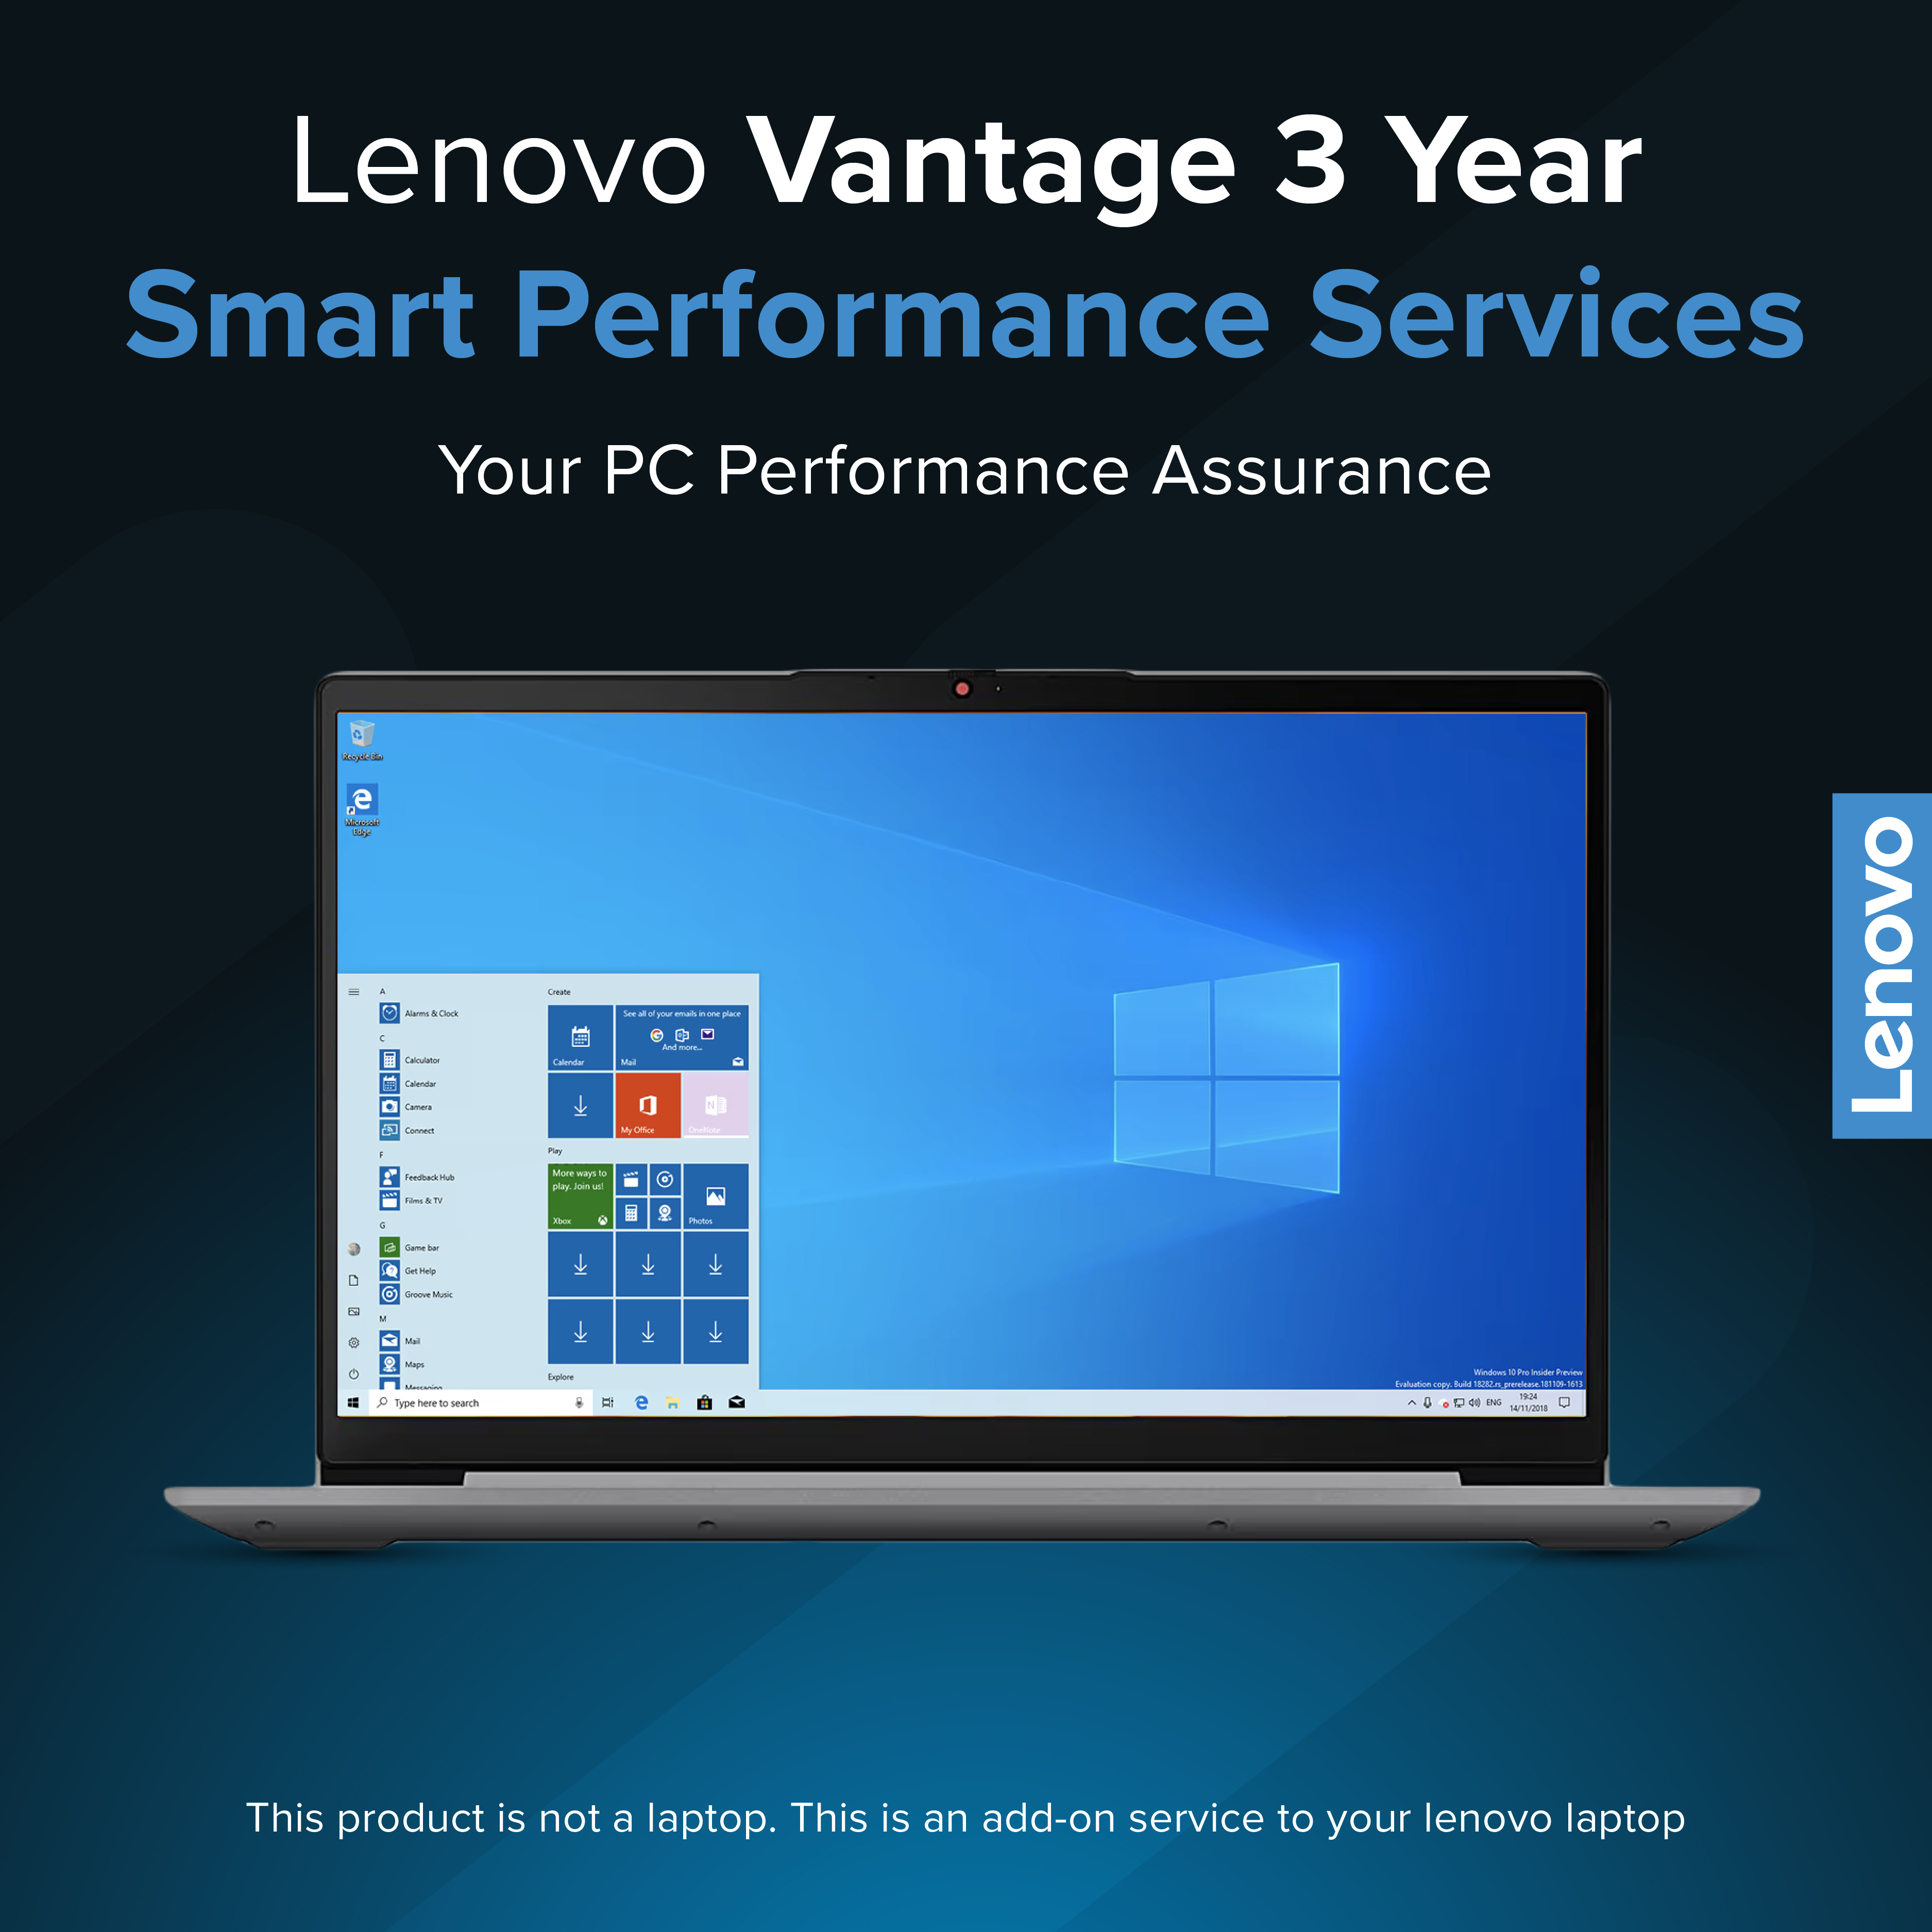 Lenovo, one of the world’s leading computing device manufacturers, offers after sales service in the form of an application called Lenovo Vantage